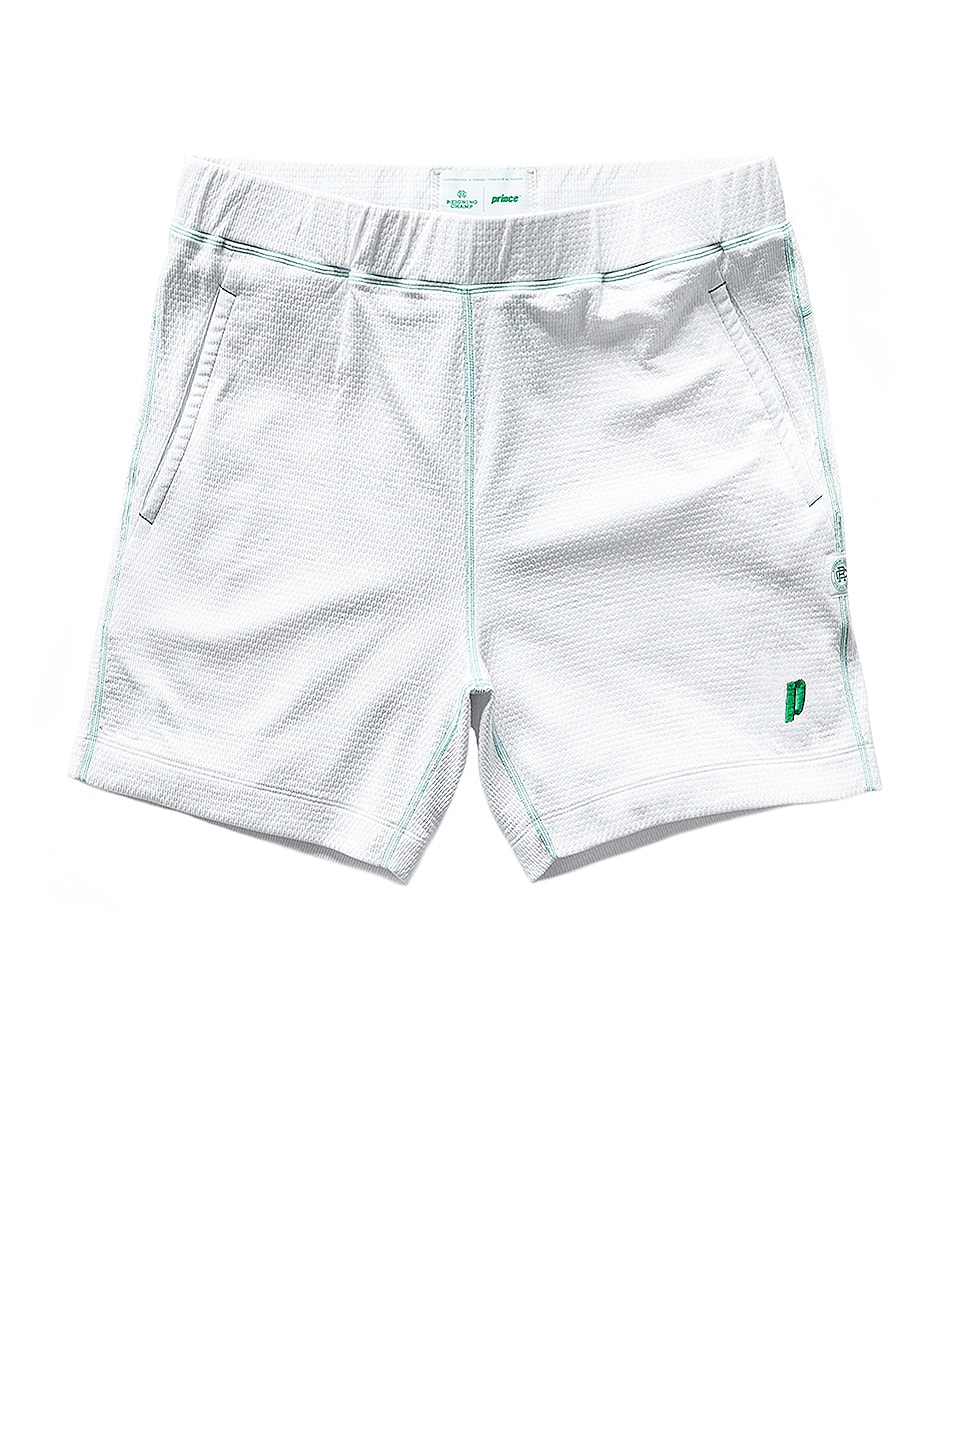 Reigning Champ X Prince Shorts in White